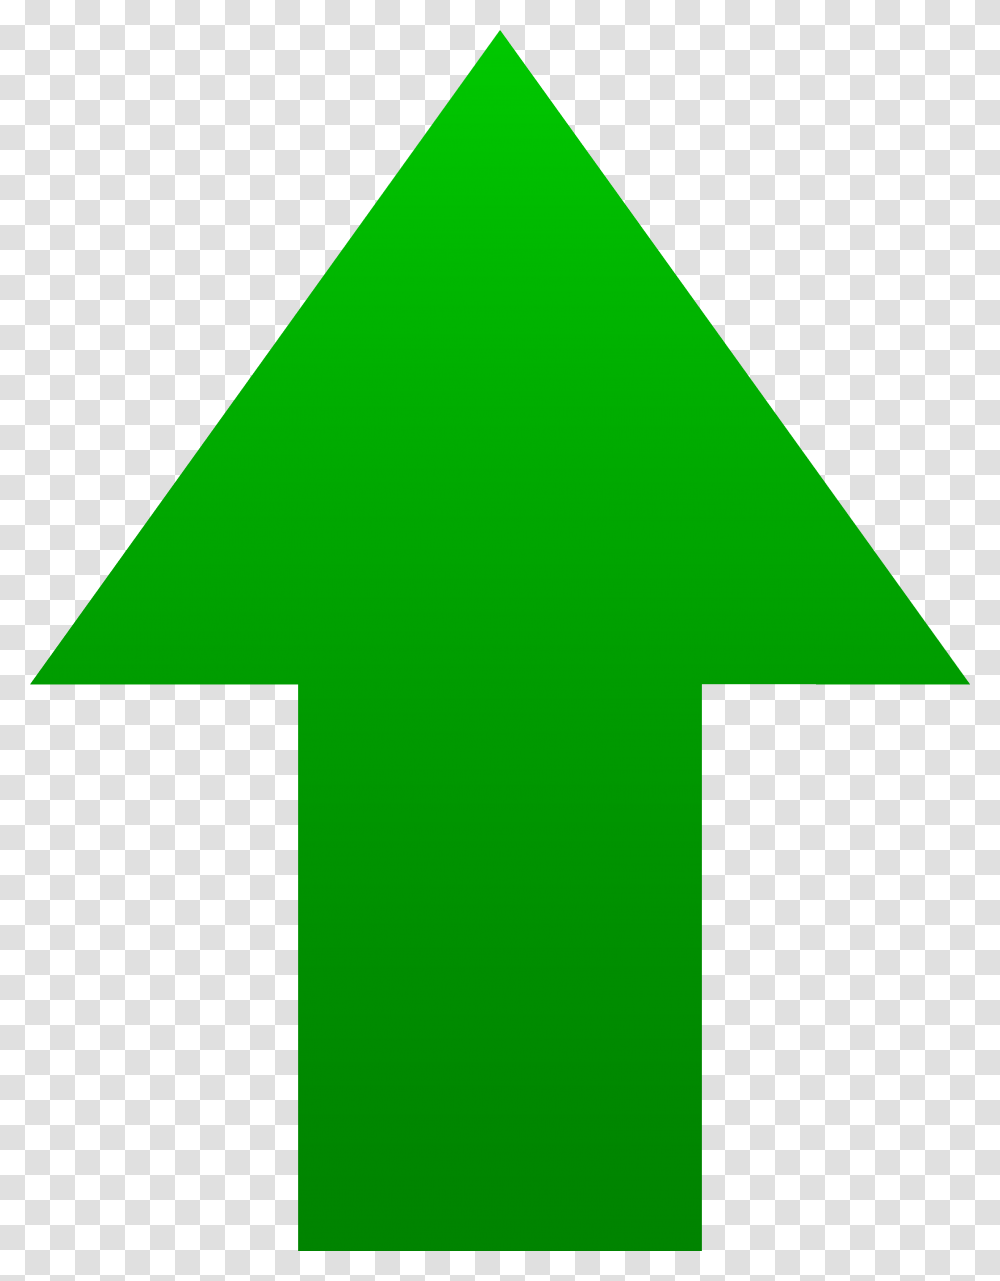 Download Green Arrow Pic For Green Arrow Icon, Symbol, Triangle, Sign, Star Symbol Transparent Png